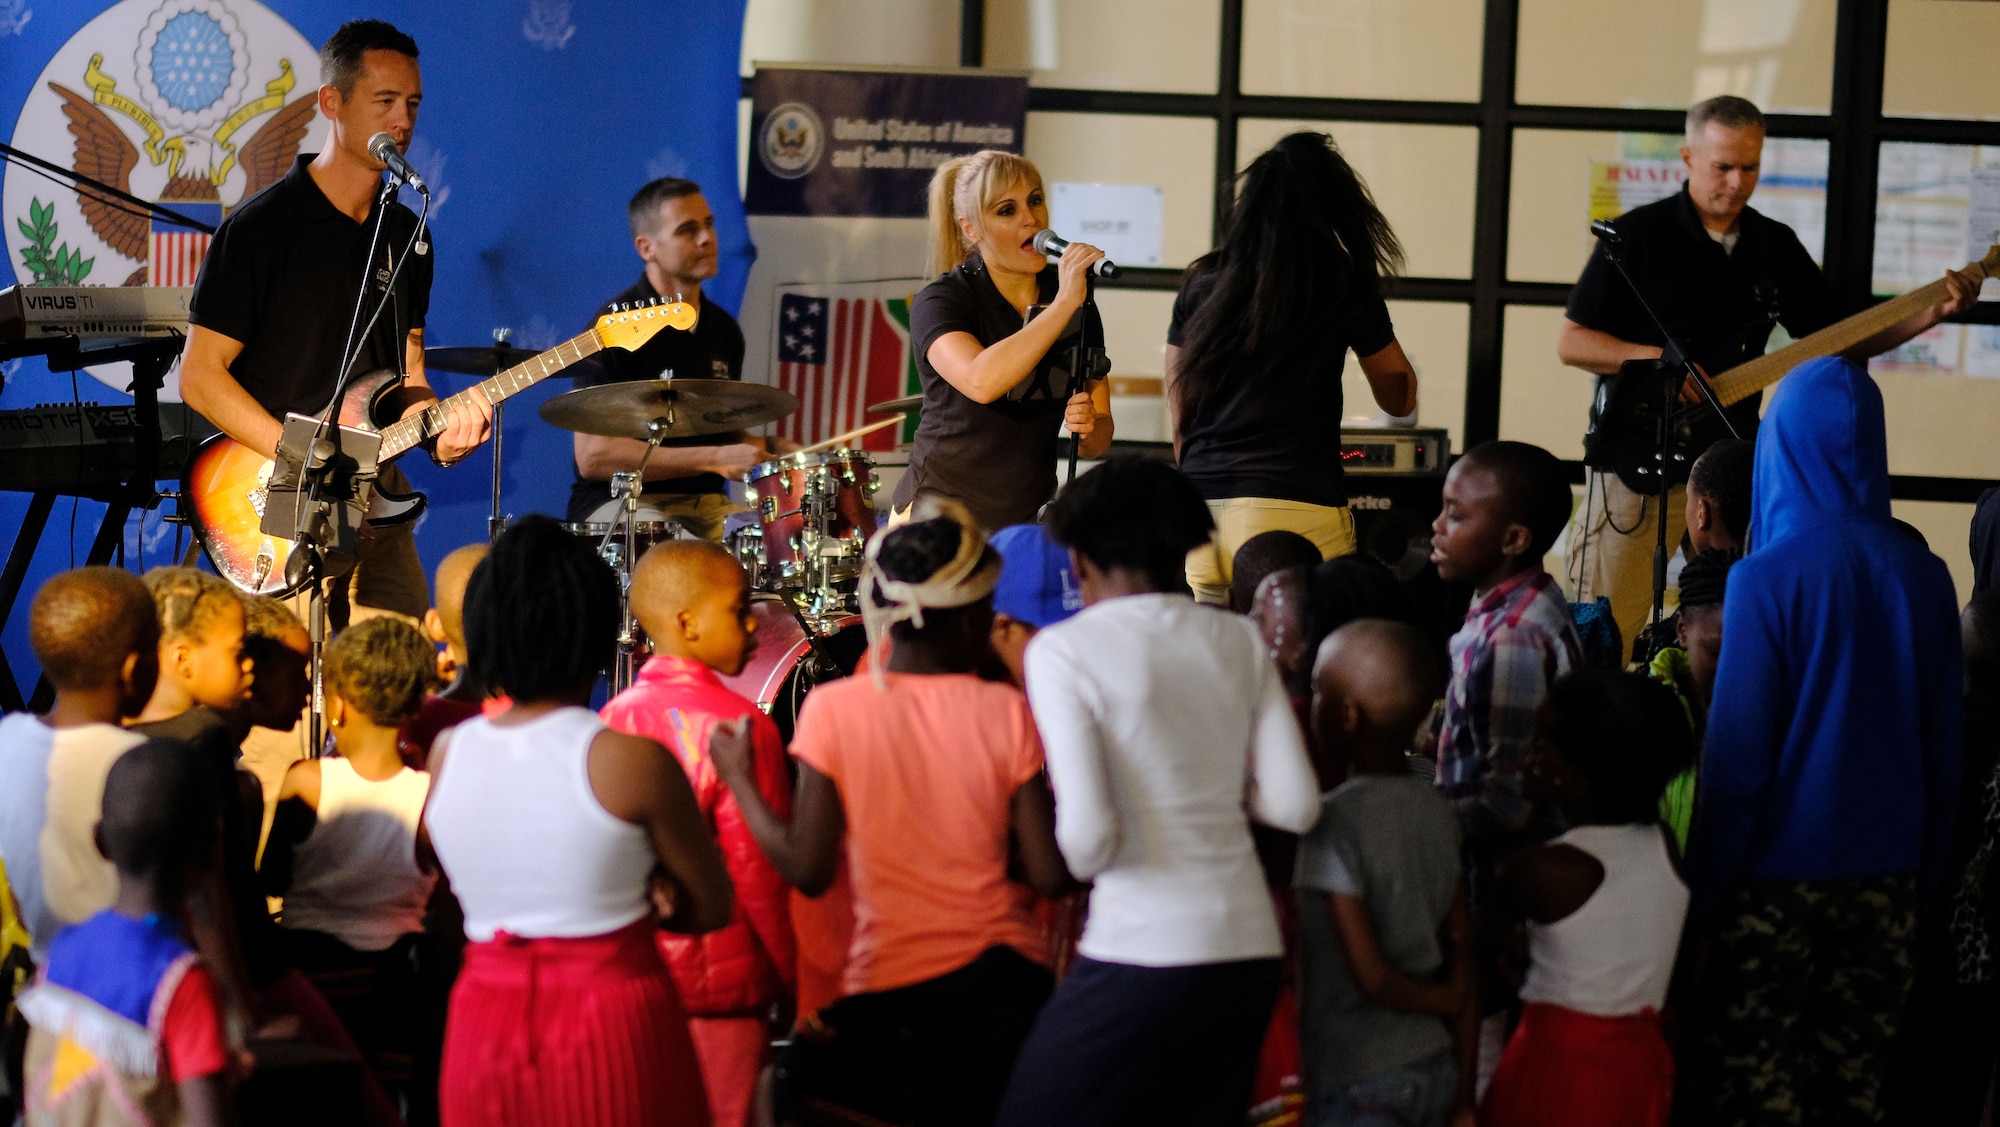 Members of the United States Air Forces in Europe- Air Forces Africa band  Touch ’n Go perform a concert for children at Ponte City in Johannesburg, South Africa, September 21, 2018. The band’s performance provides a unique opportunity for the U.S. to develop strong connections with its African partners and their communities. (US Army photo by Staff Sgt. Jeffery Sandstrum)